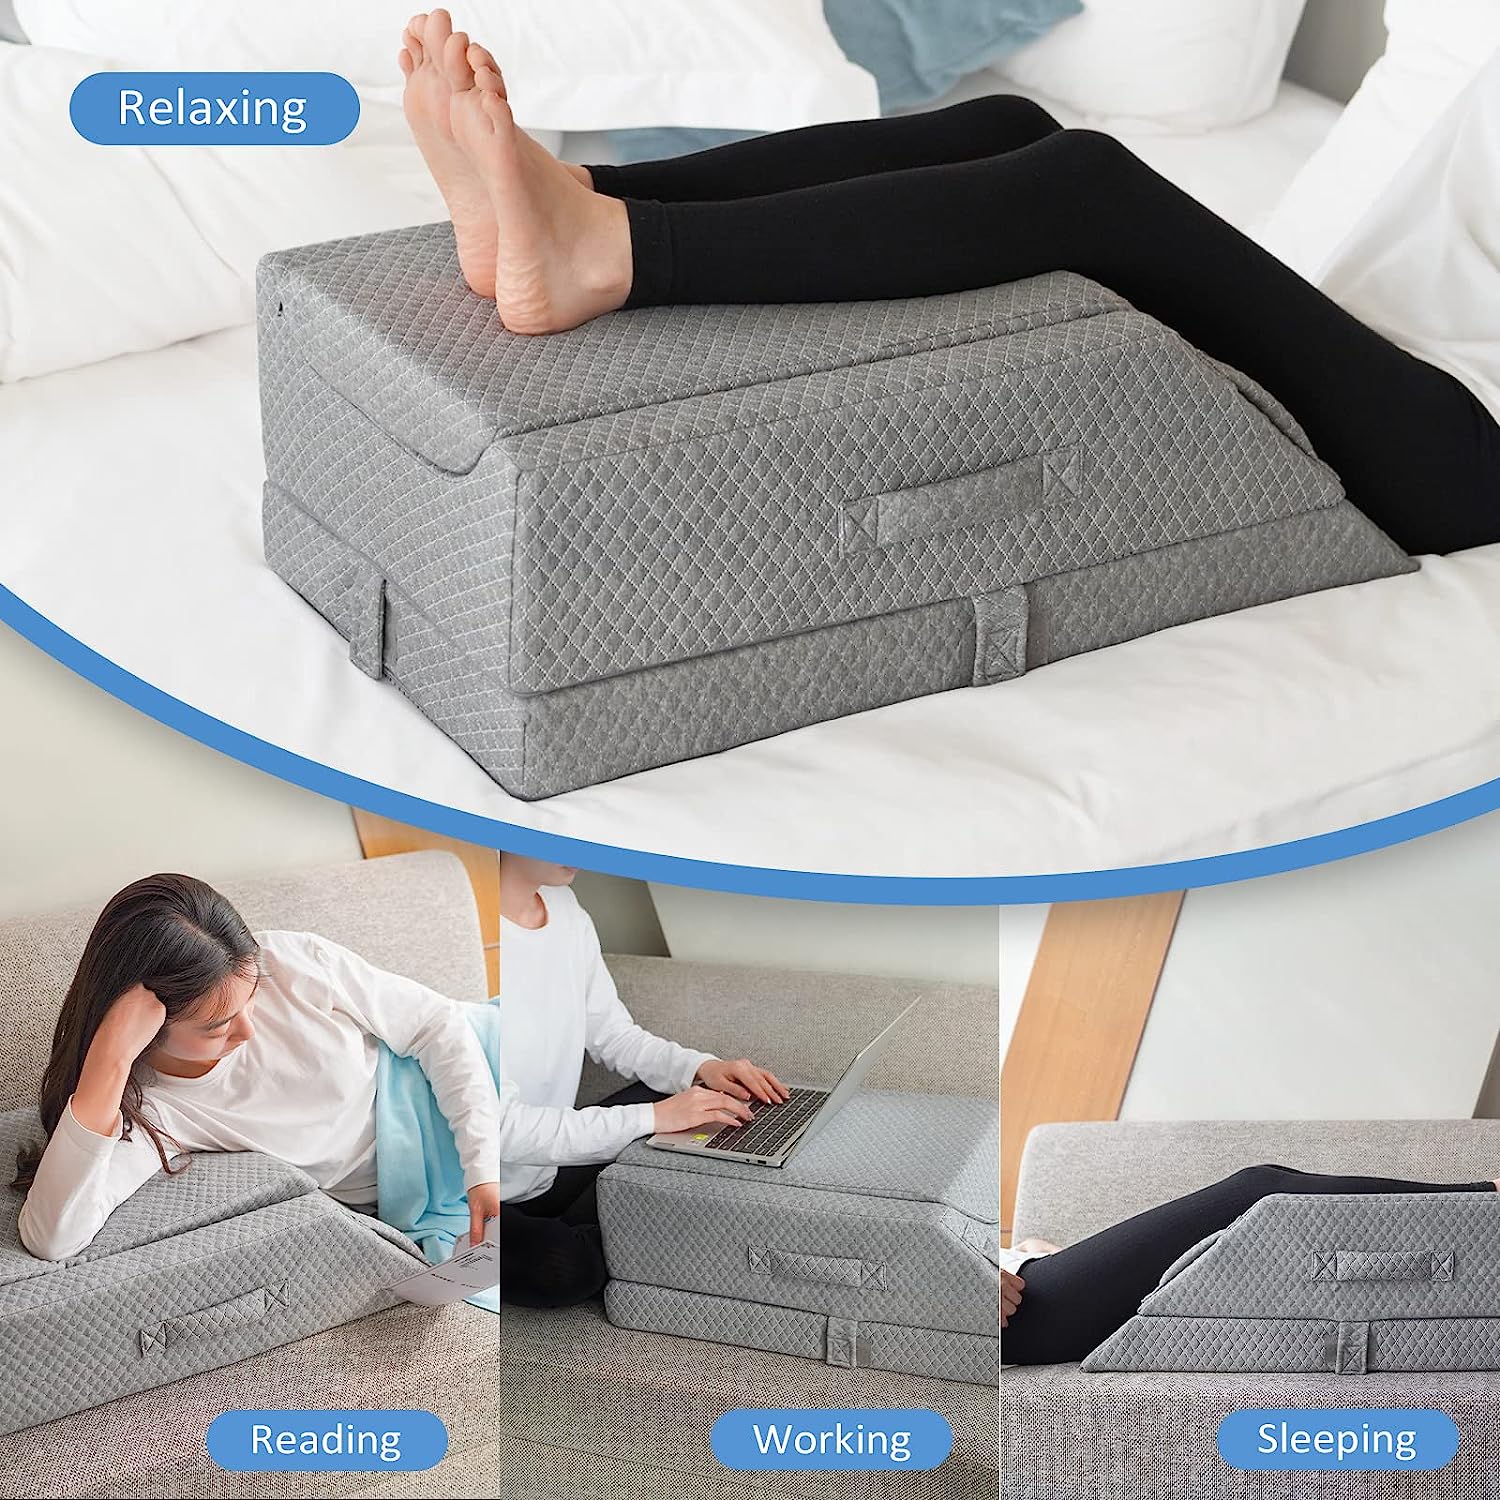 Leg Elevation Pillow with Memory Foam Top - Elevating Leg Rest to Reduce Swell